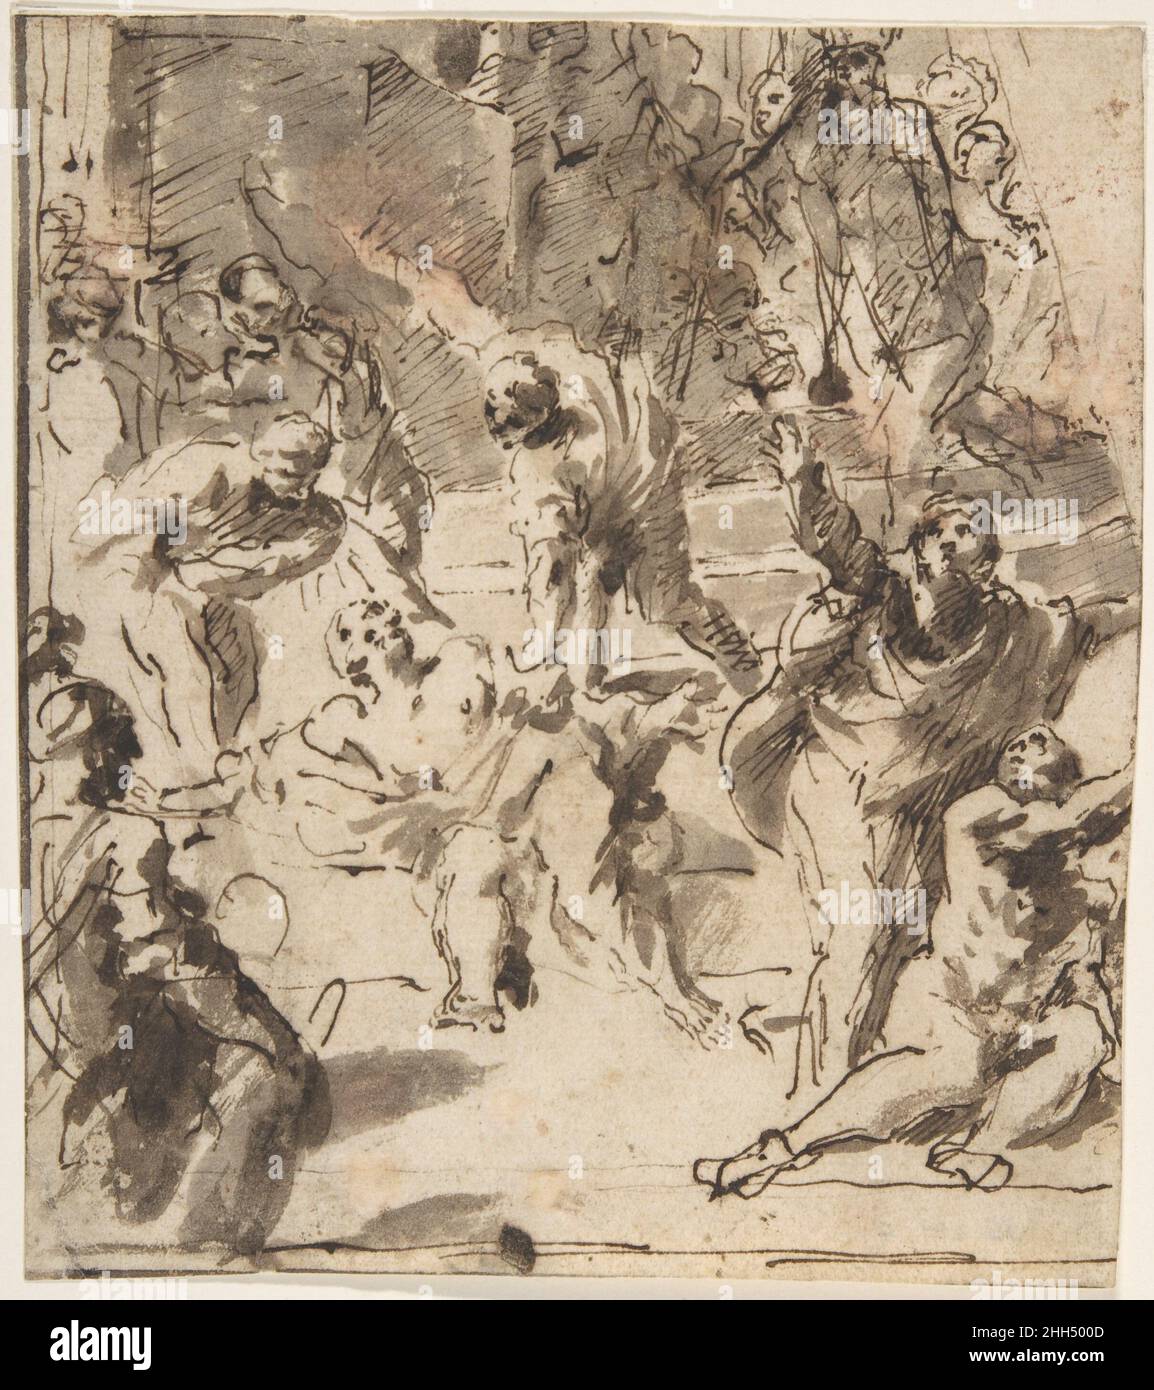 The Martyrdom of the Apostle Thomas 1638–1646 Giovanni Lanfranco Italian An excellent example of Lanfranco's Neapolitan manner with pen and ink, this study is preparatory for a fresco of the Martyrdom of Saint Matthias, at the right of a window in the inner façade of the church of Santi Apostoli, Naples. Between 1638 and 1646 Lanfranco frescoed the interior of this church with scenes of the Apostles' deaths by martyrdom. Other studies for the same compositions are now in the Museo di Capodimonte (Naples), Royal Collections at Windsor Castle, and the Gabinetto Disegni e Stampe degli Uffizi (Flo Stock Photo